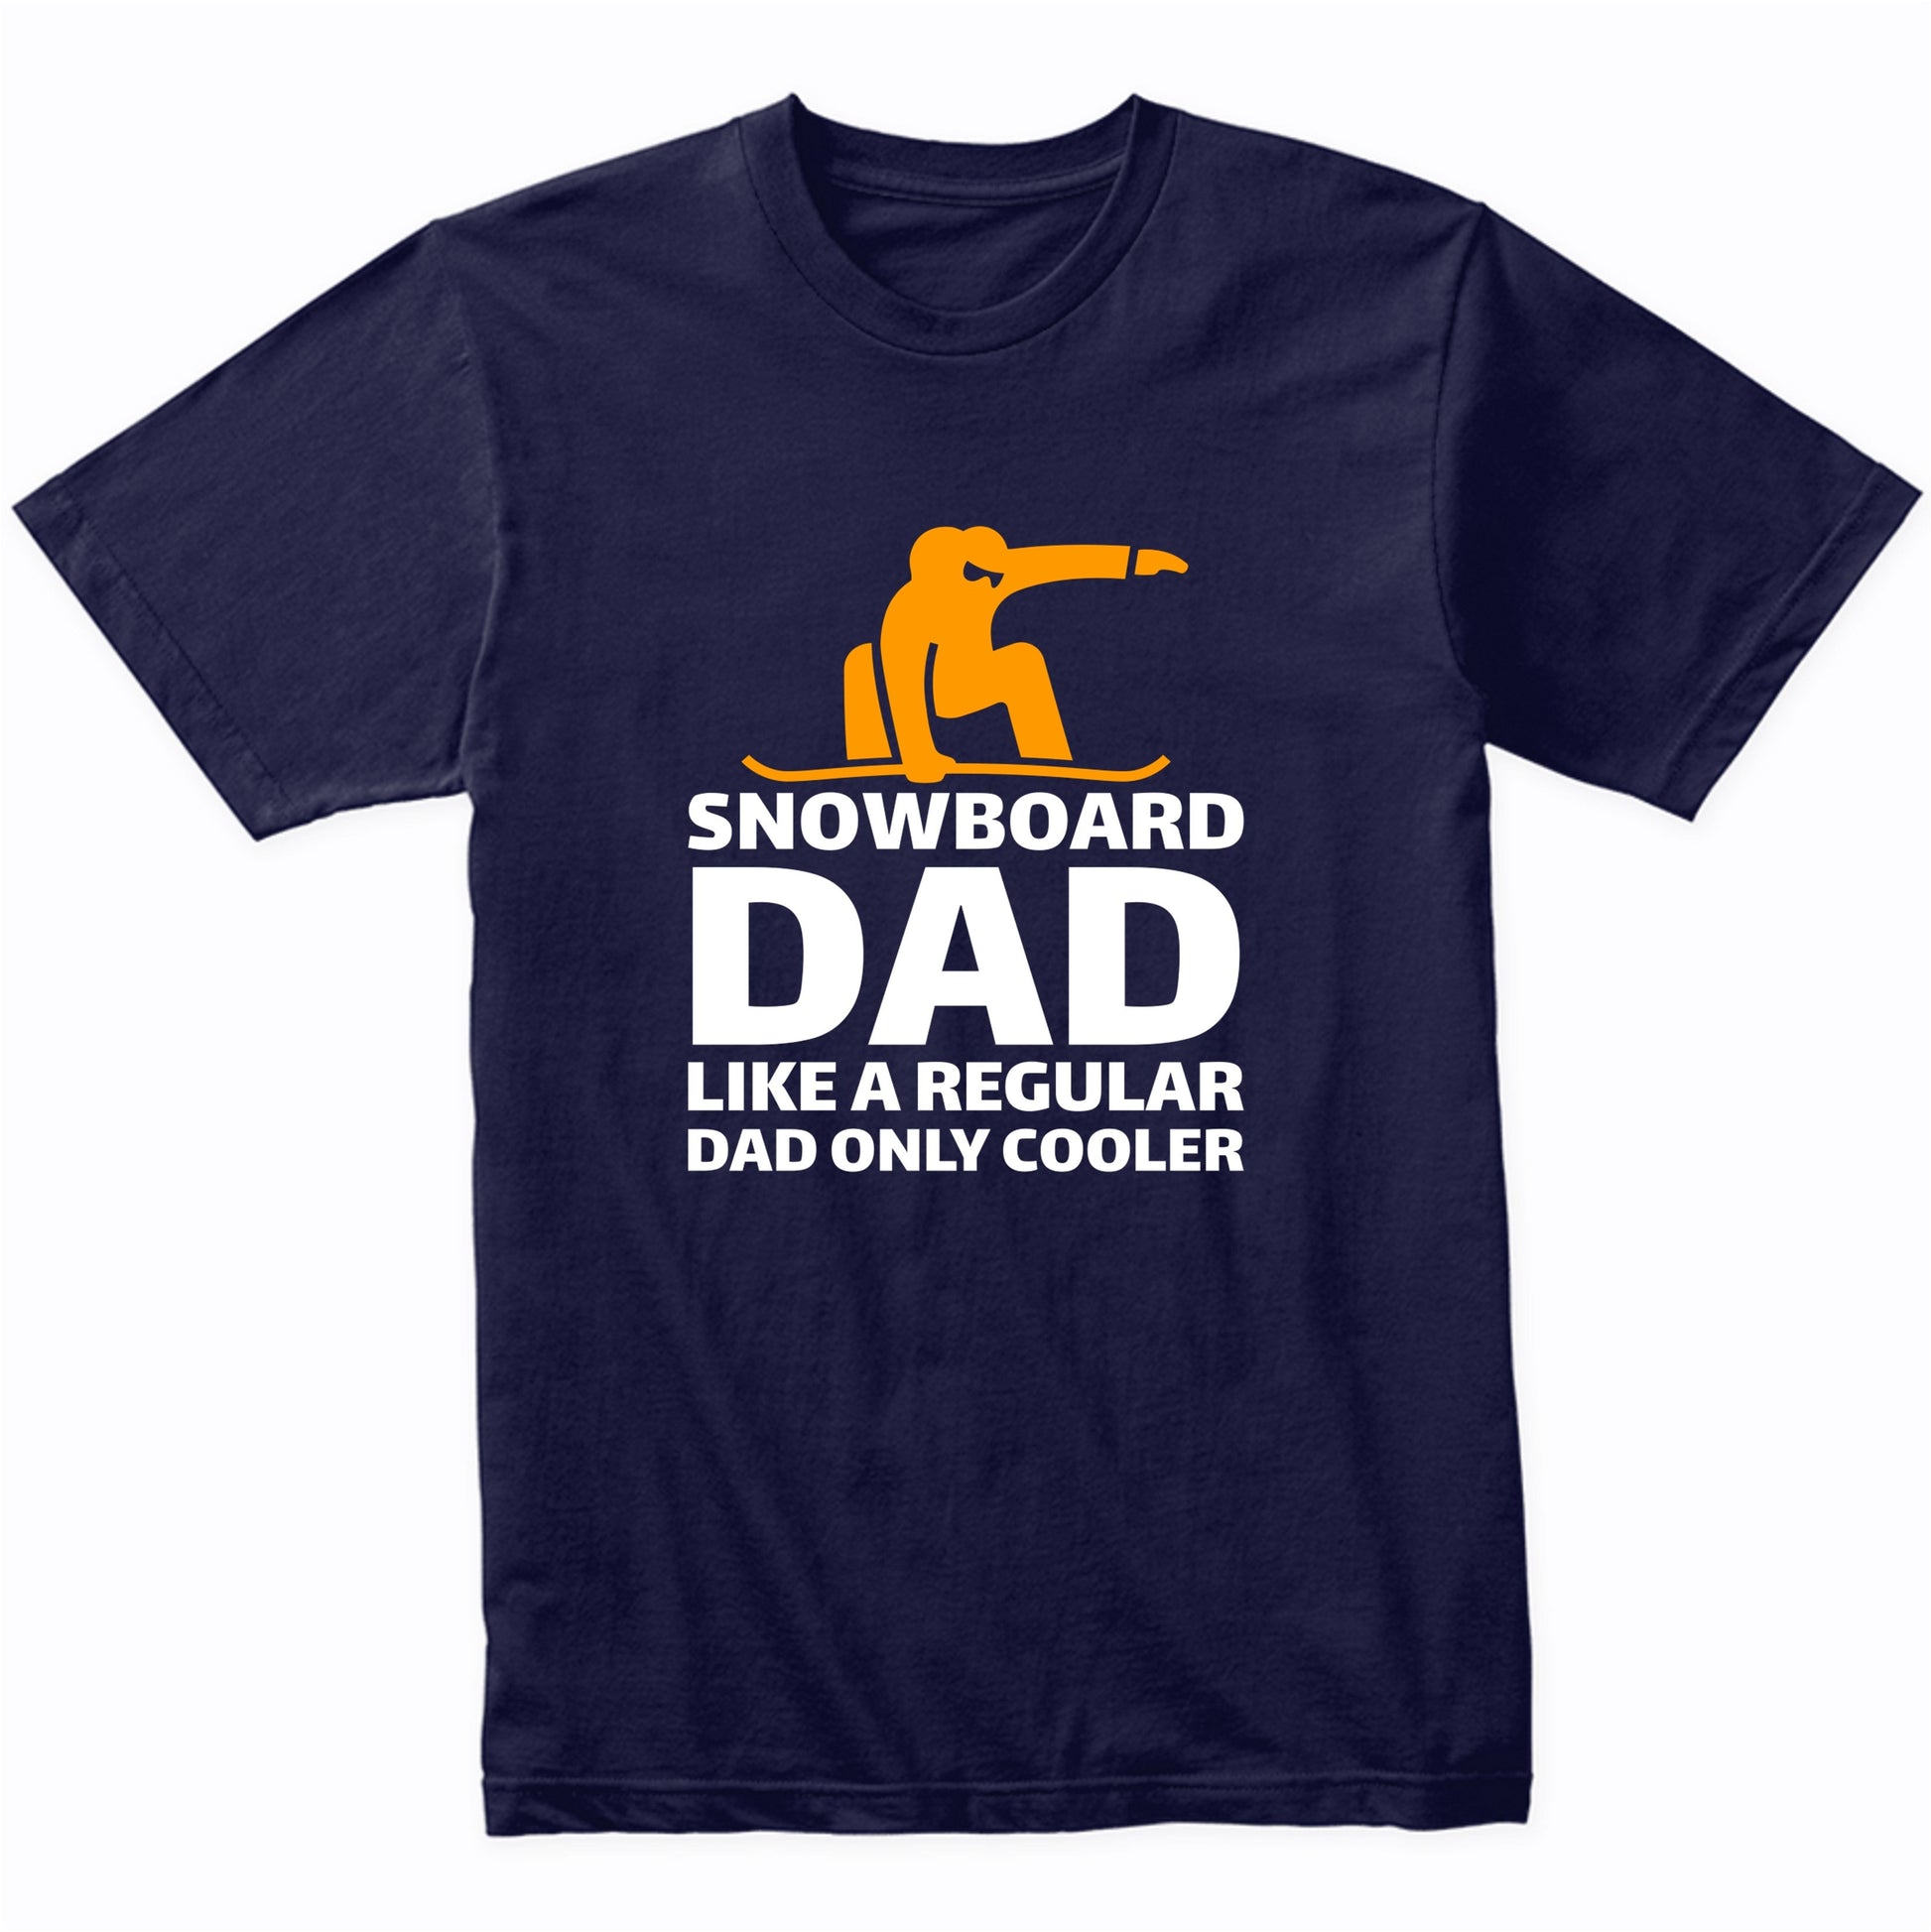 Snowboarding Dad Like A Regular Dad Only Cooler Funny T-Shirt